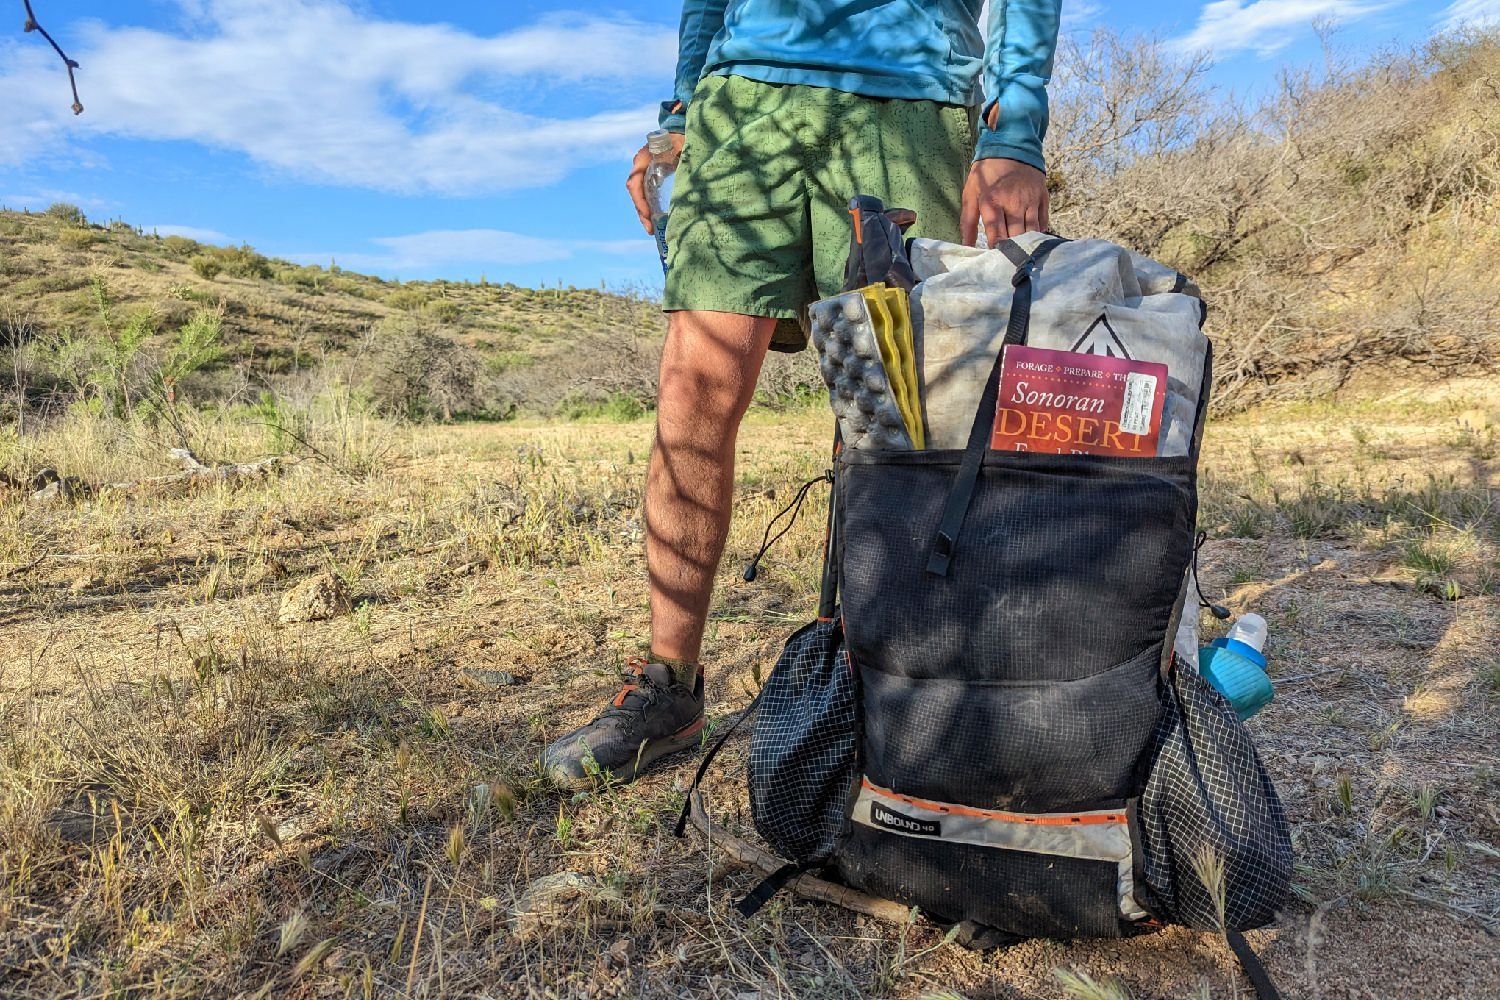 A packed Hyperlite Mountain Gear Unbound 40 sitting on the ground next to a standing hiker in a desert scene - there is a Sonoran Desert field guide and a Z seat in the front pocket